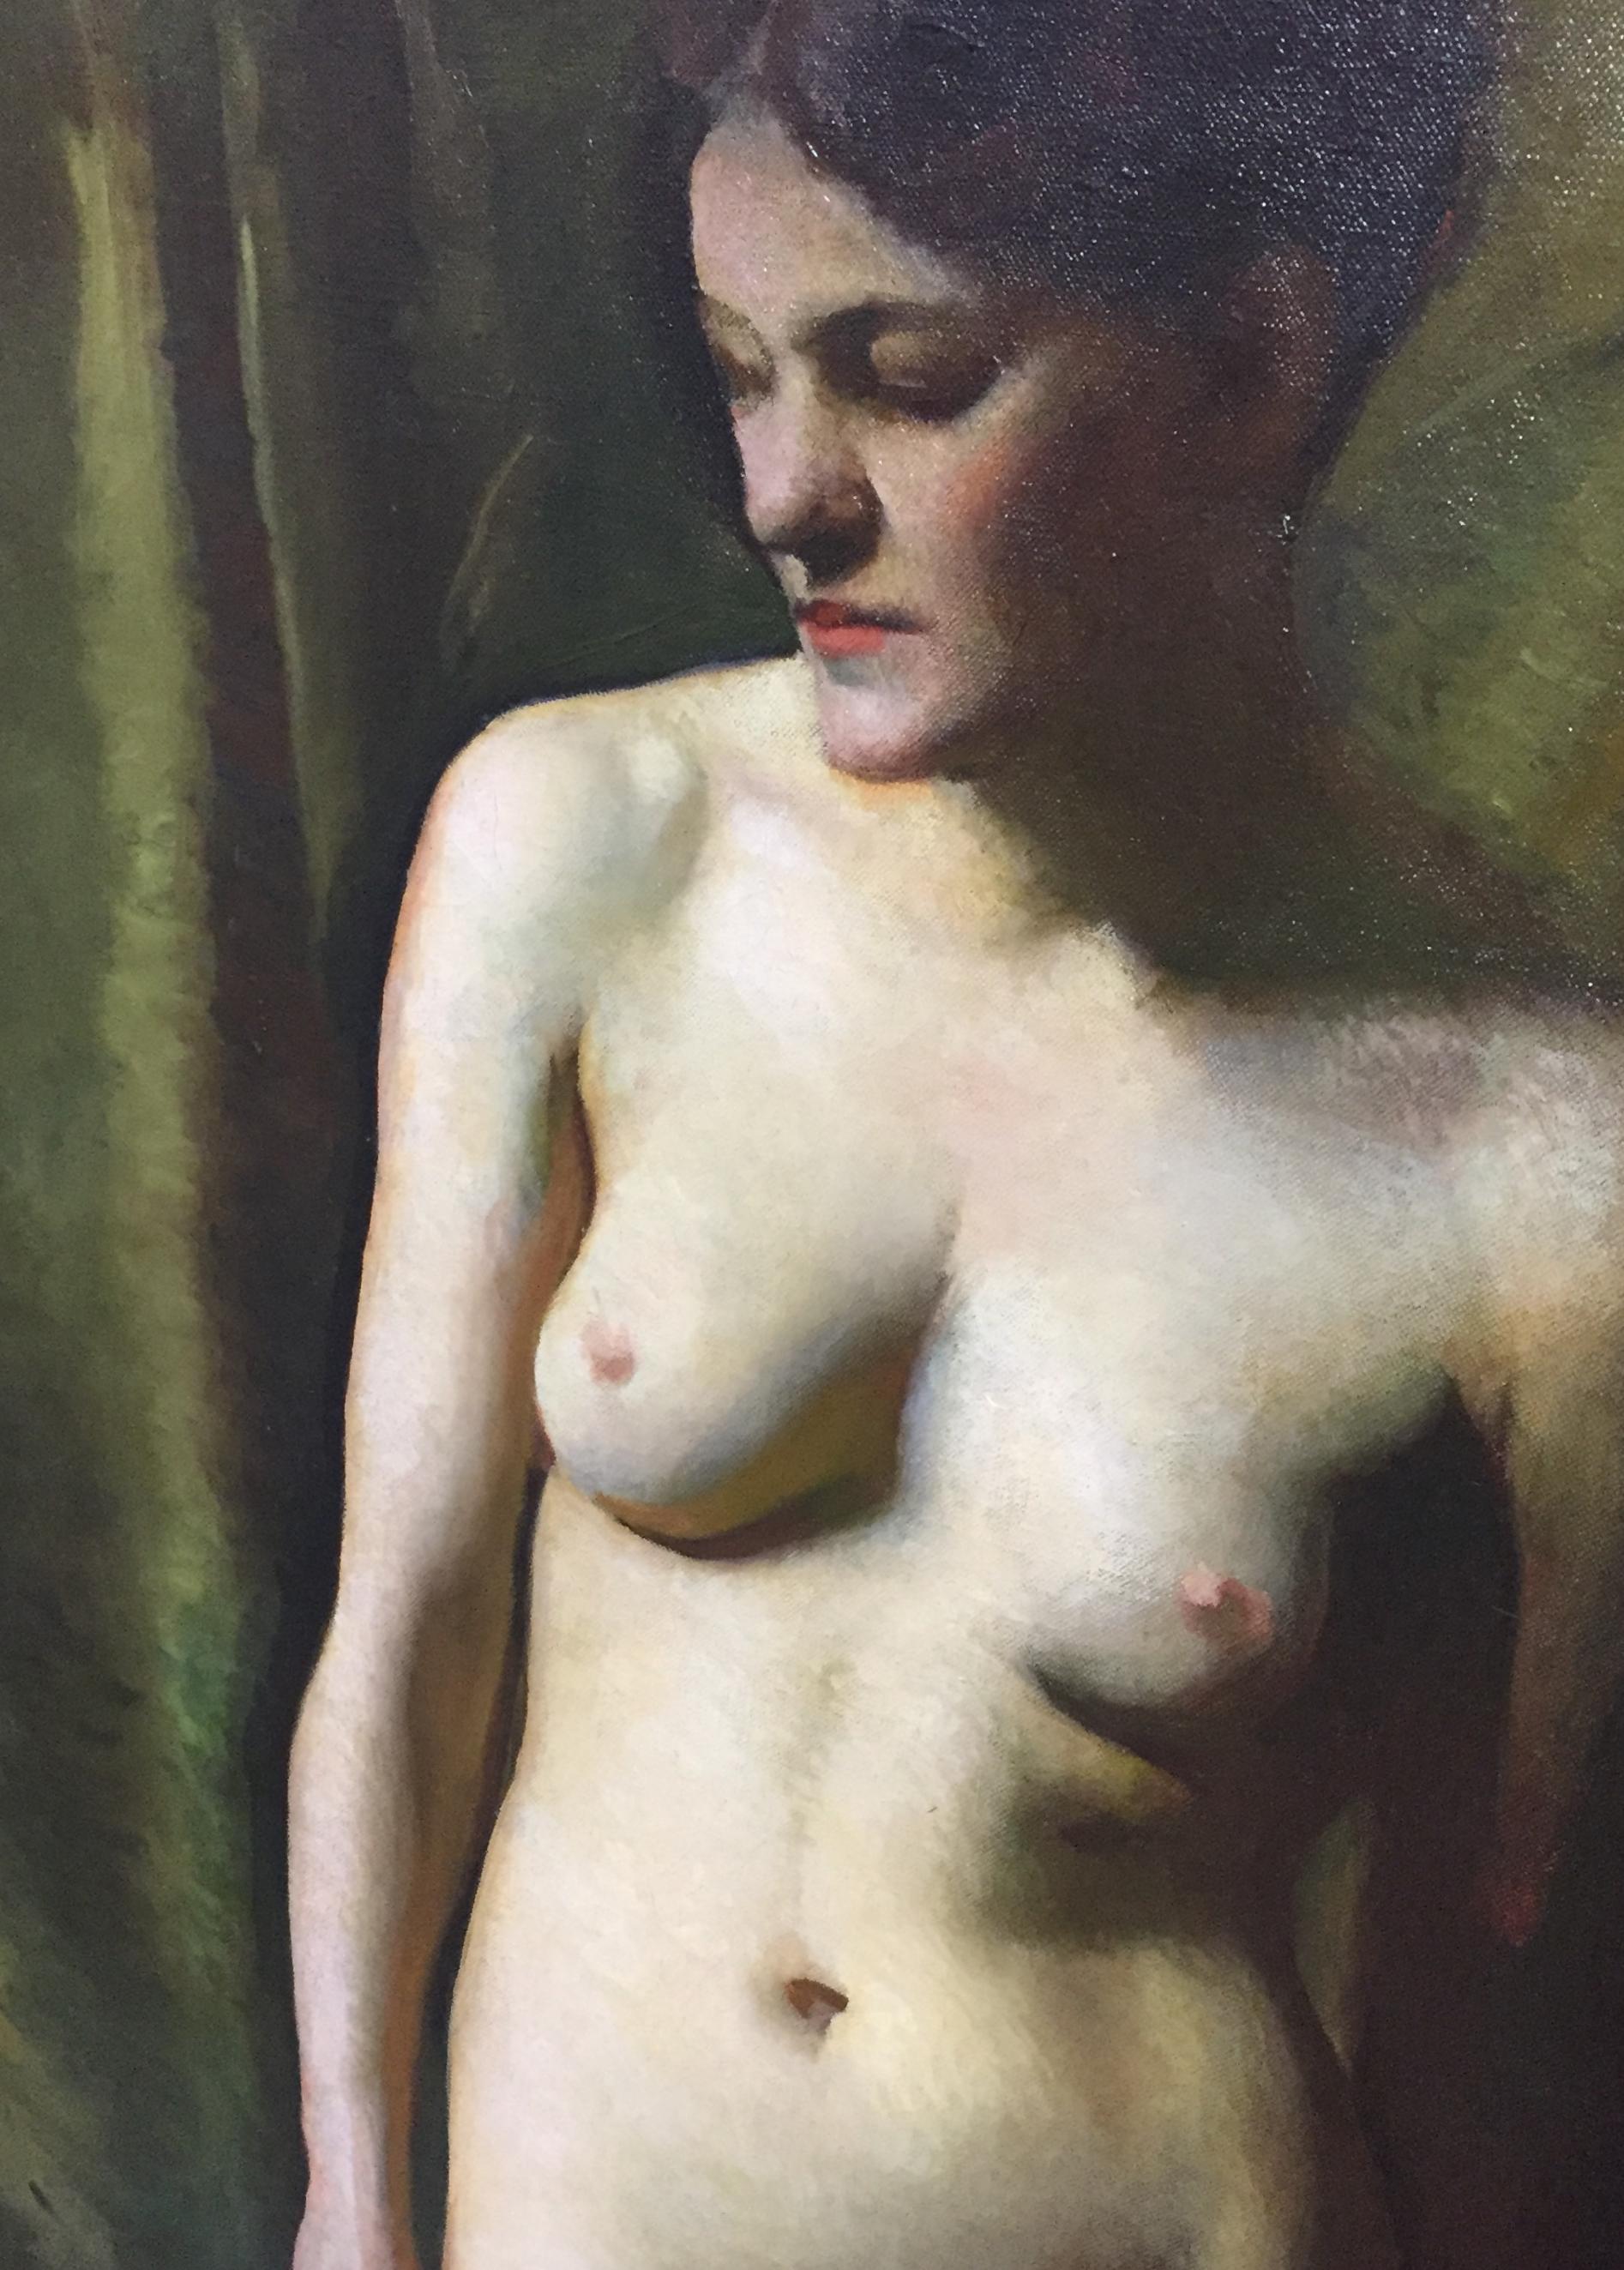 This large and arresting painting is what I believe must have been one of a pair, with a male nude of exactly the same size and style by the artist that sold at Coletti Gallery many years back (priced at $9,000 - see photos; female nudes are more in